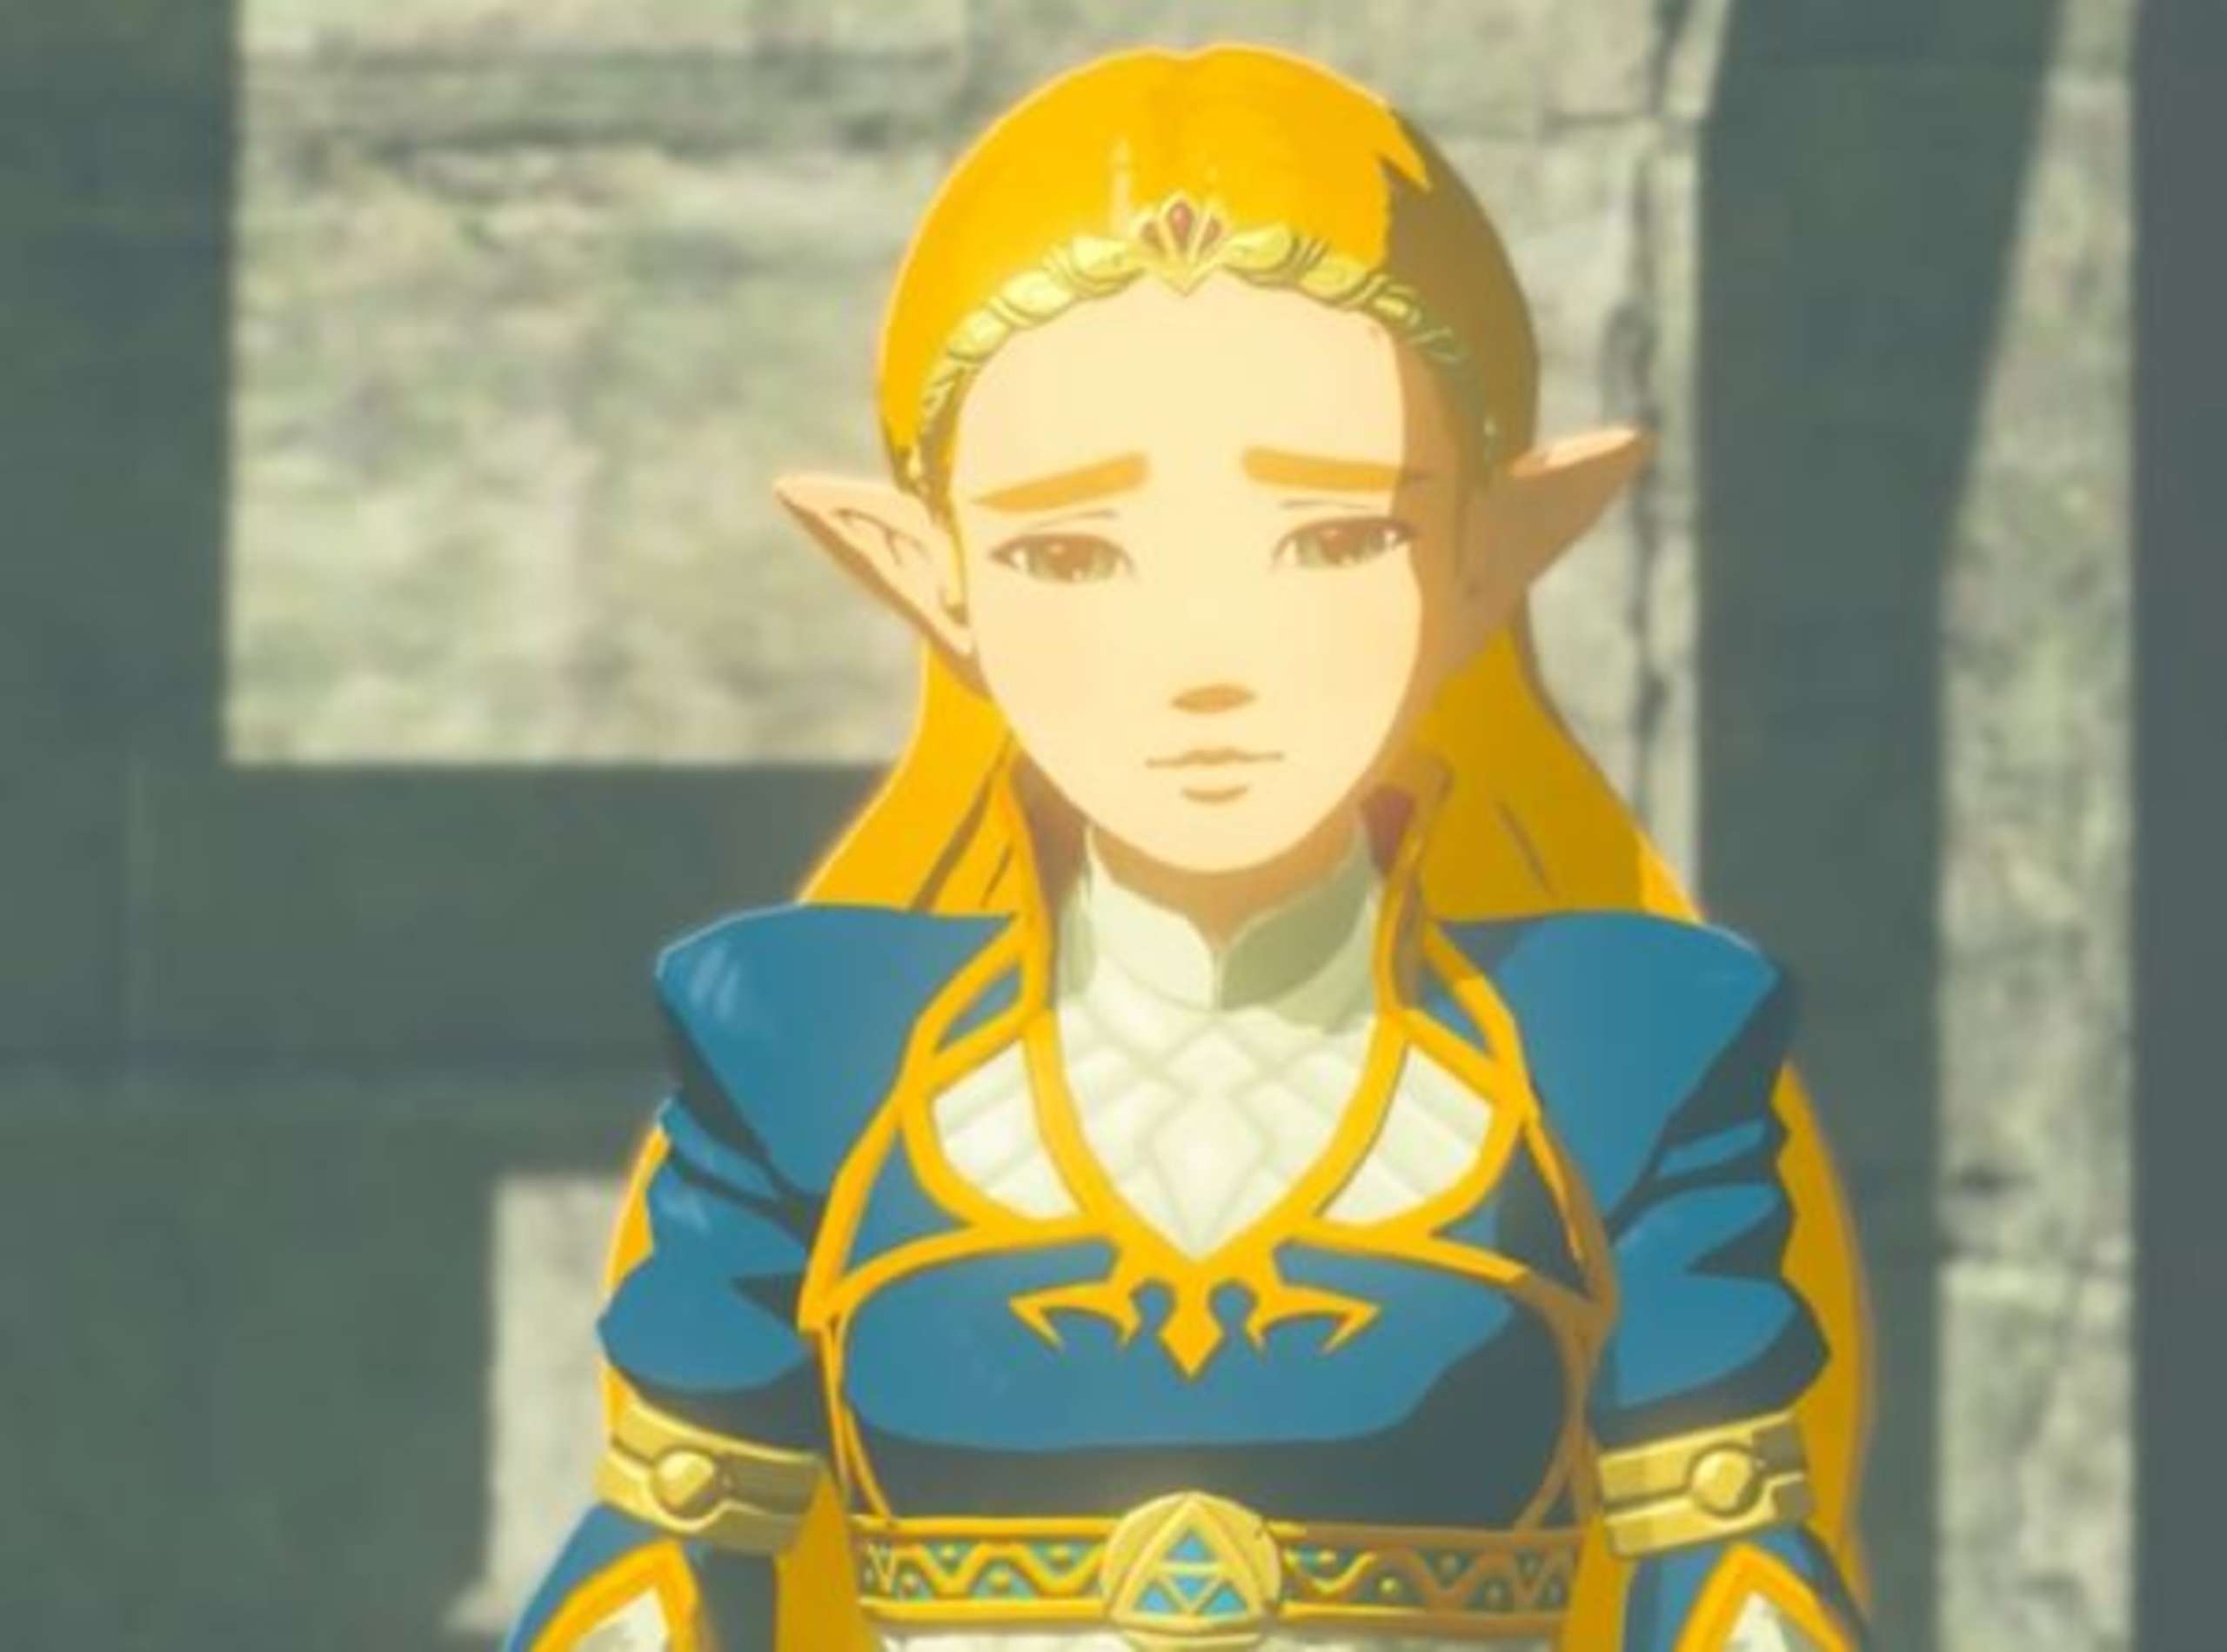 One Legend Of Zelda Supporter Was Inspired To Dress As The Game’s Protagonist By The Stunning Royal Blue Of Princess Zelda’s Robe In Breath Of The Wild